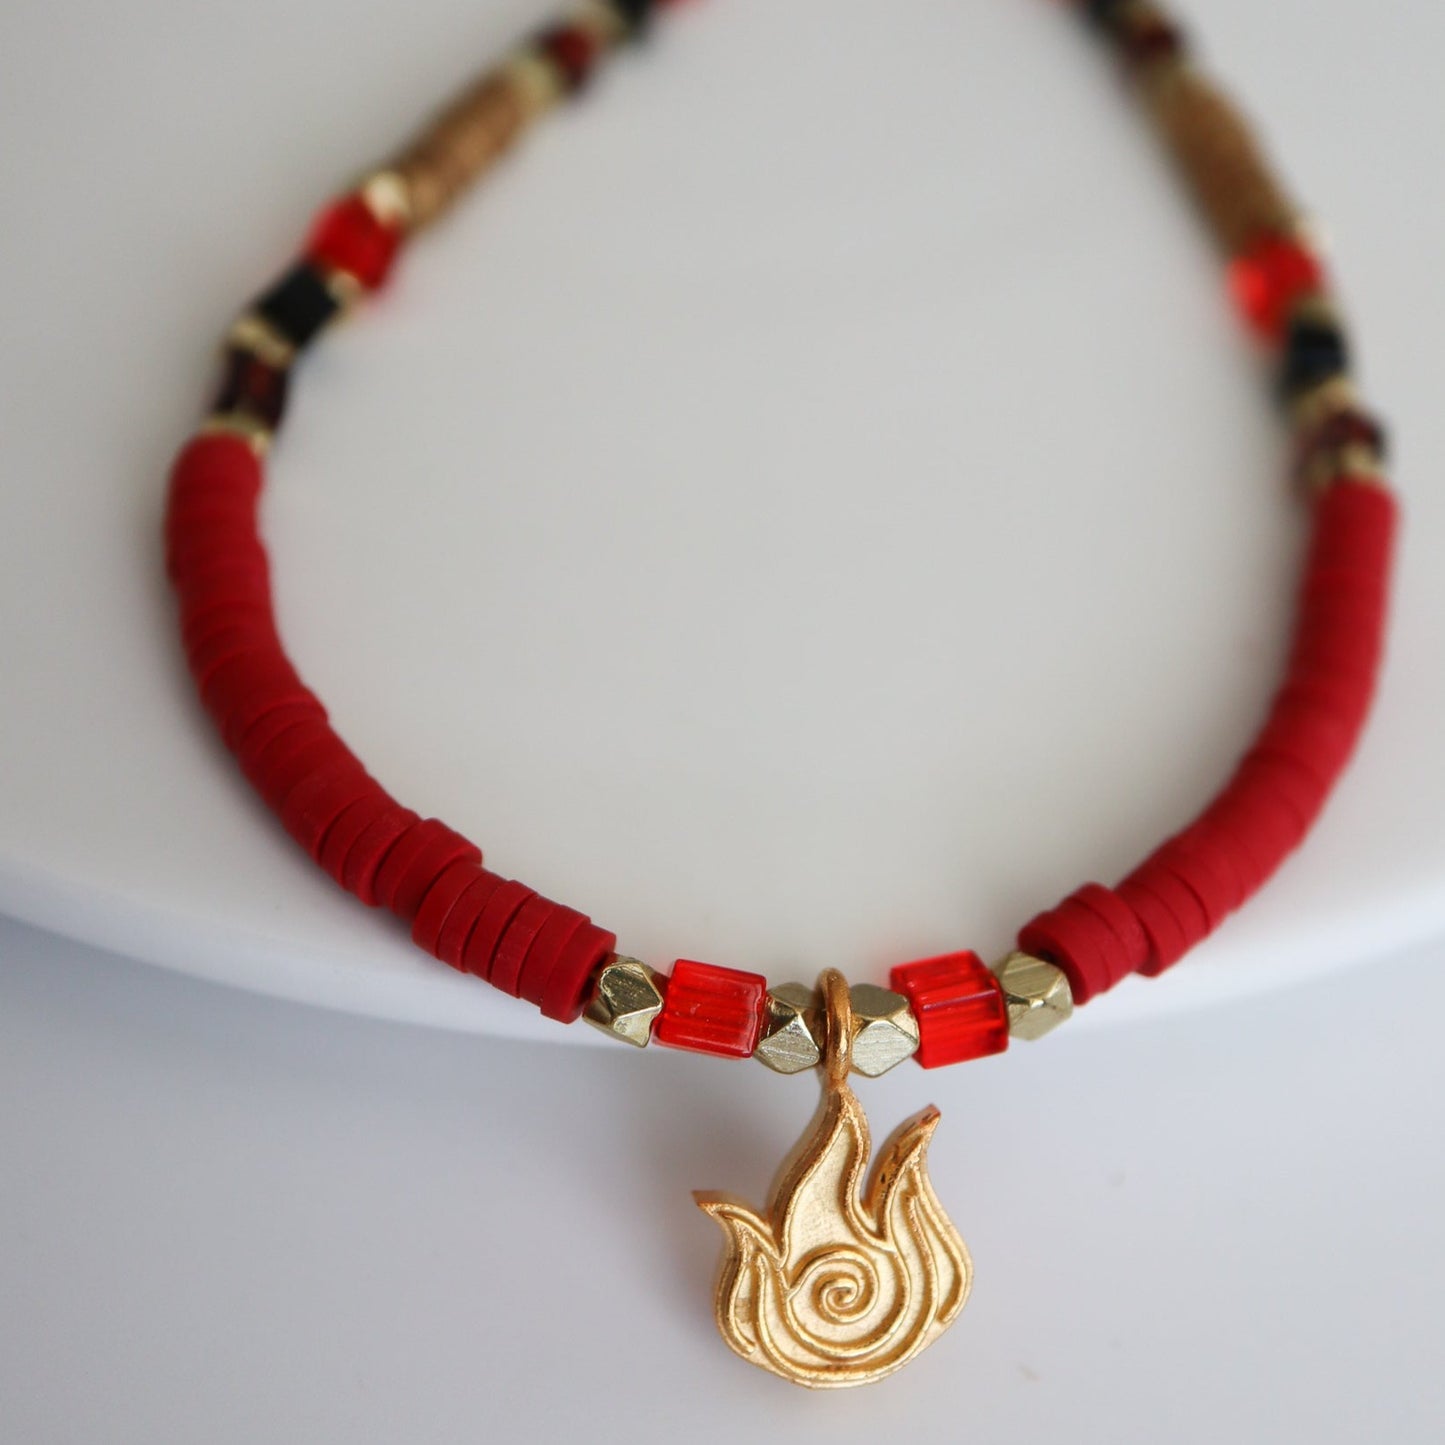 Fire necklace